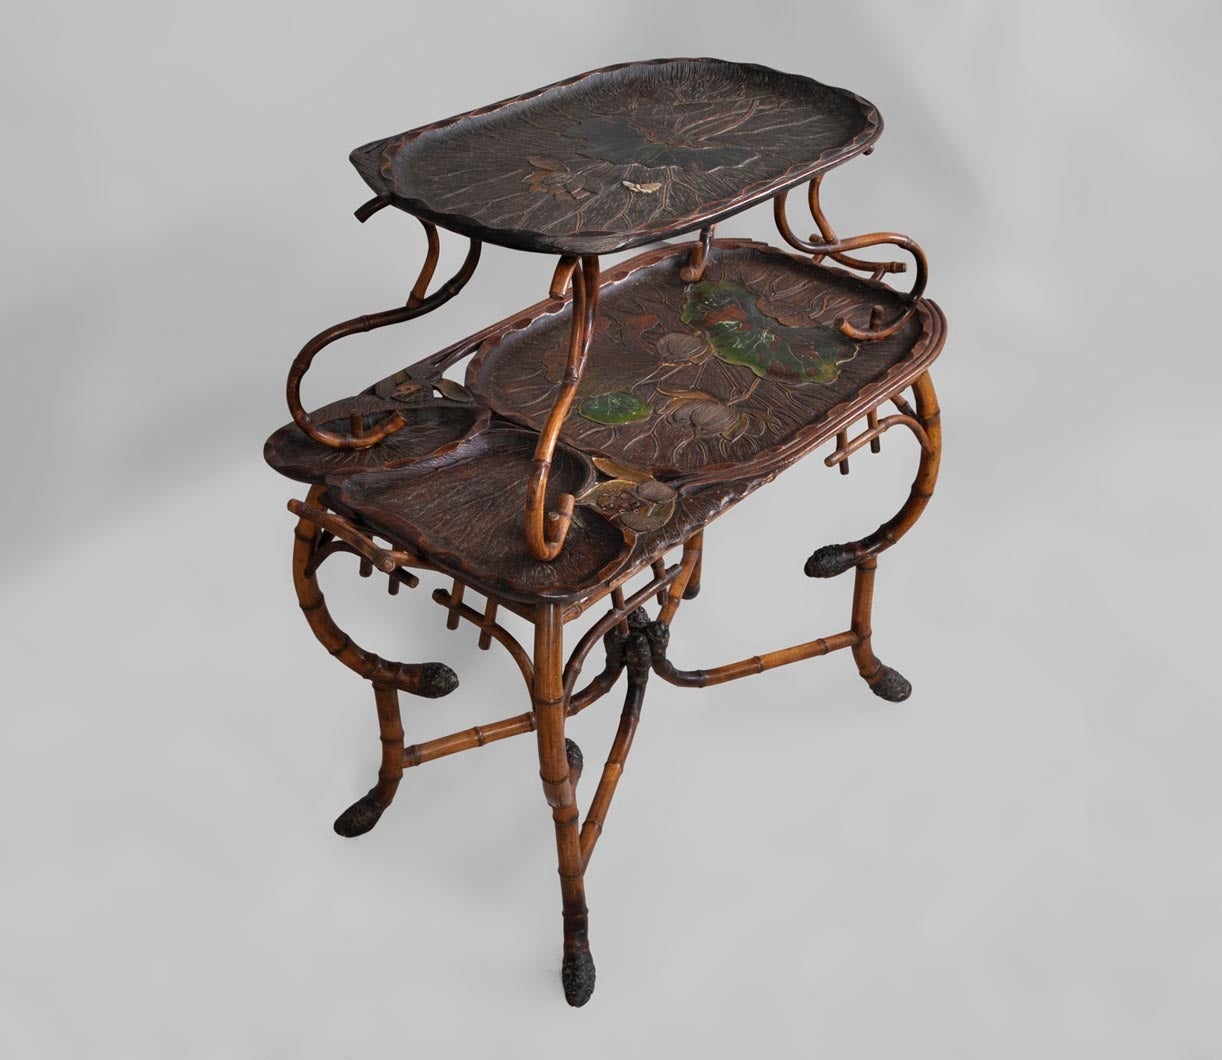 This table bears the mark of the DAÏ NIPPON, a Parisian cabinetmaker from the late 19th century. Daï Nippon was specialised in the Japanese style. 
This tea table is made of bamboo with curved legs. The decor is engraved and lacquered, also with